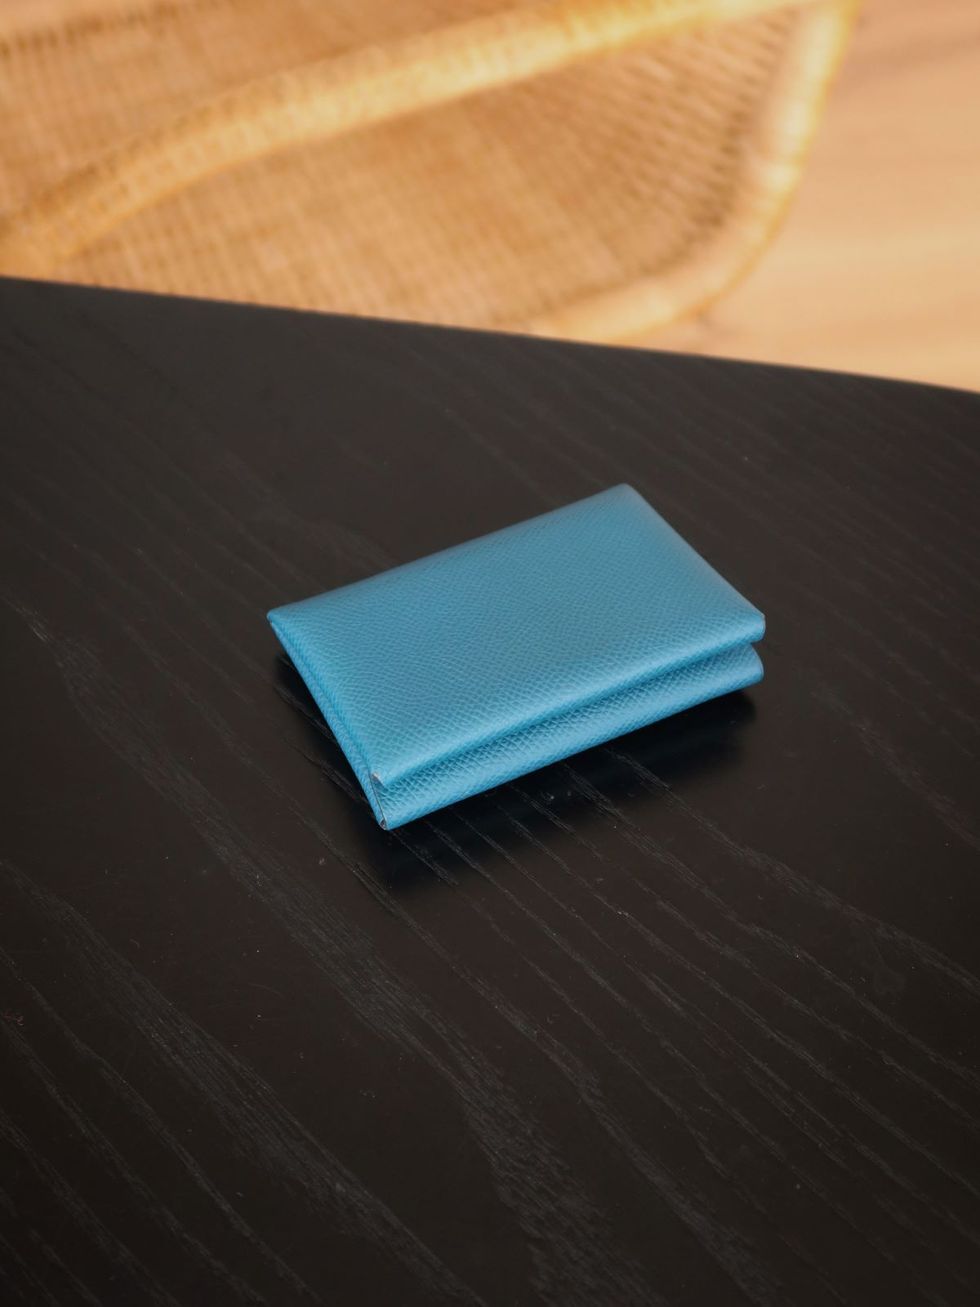 a blue square on a black surface